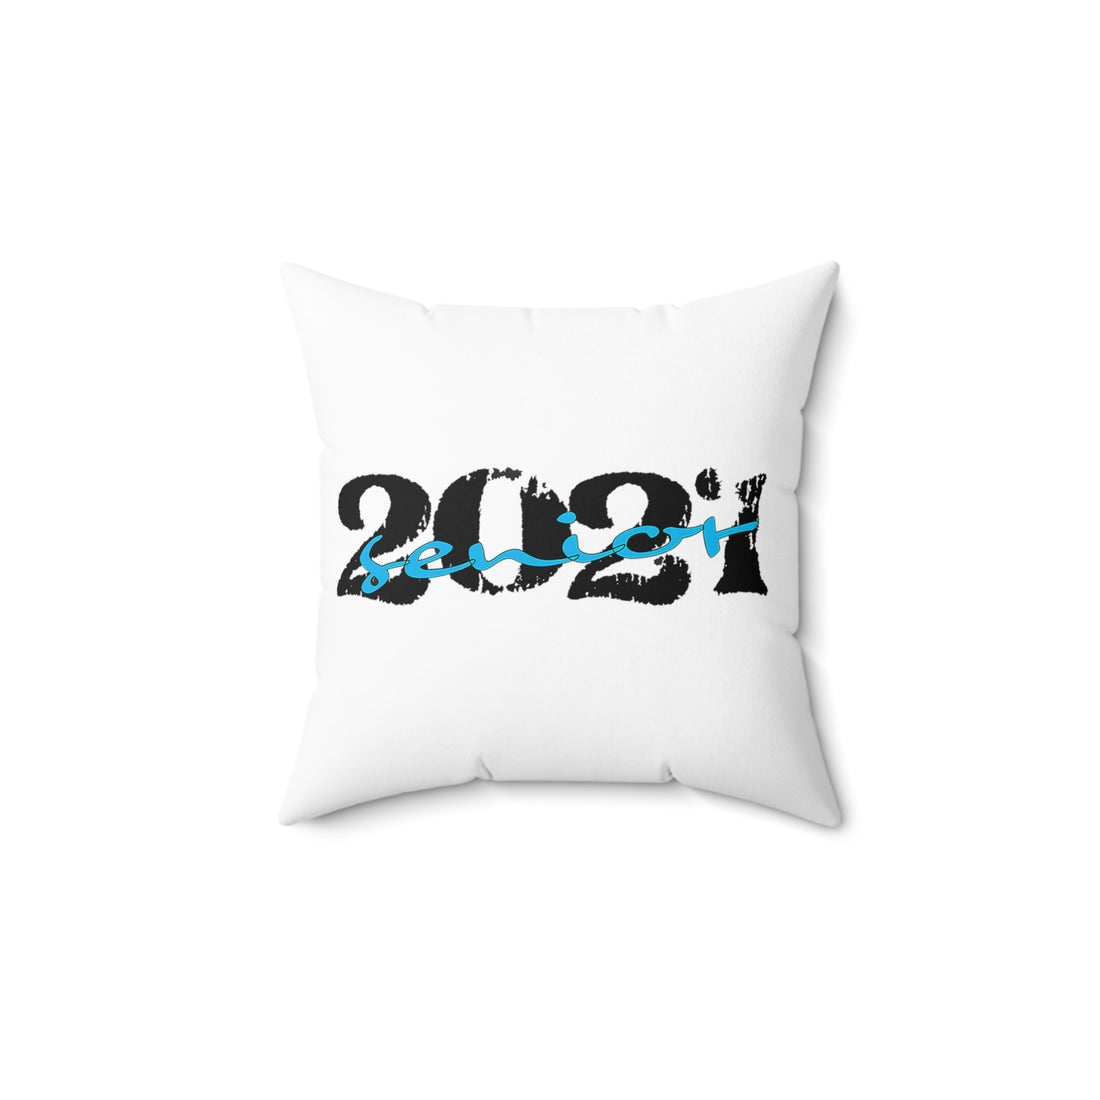 Senior With Class Year Customizable - White Pillow